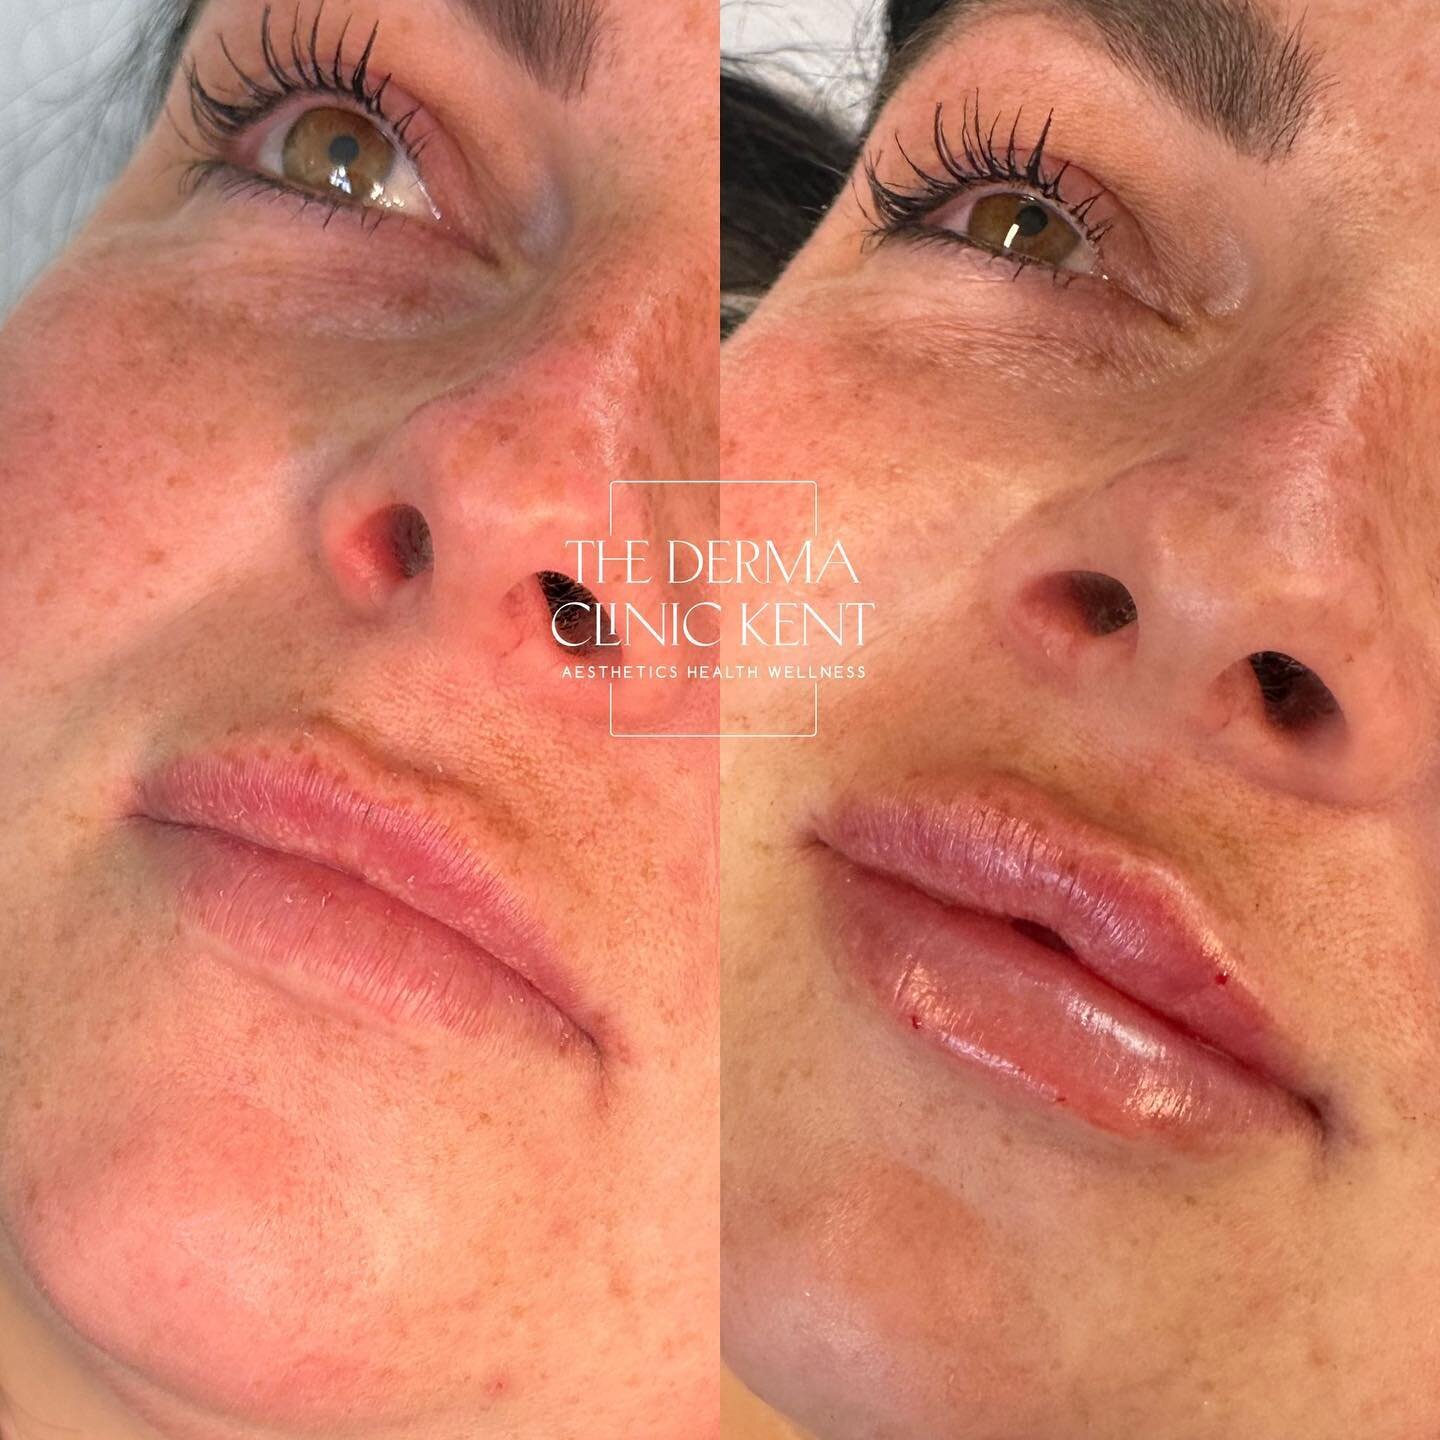 Gorgeous little pre birthday lip tweak for this absolute babe! Happy birthday 🥳 @lucyshrubsole 

We used 0.7ml to give a little va va voom to the cupids bow giving this cute little keyhole pout 💋